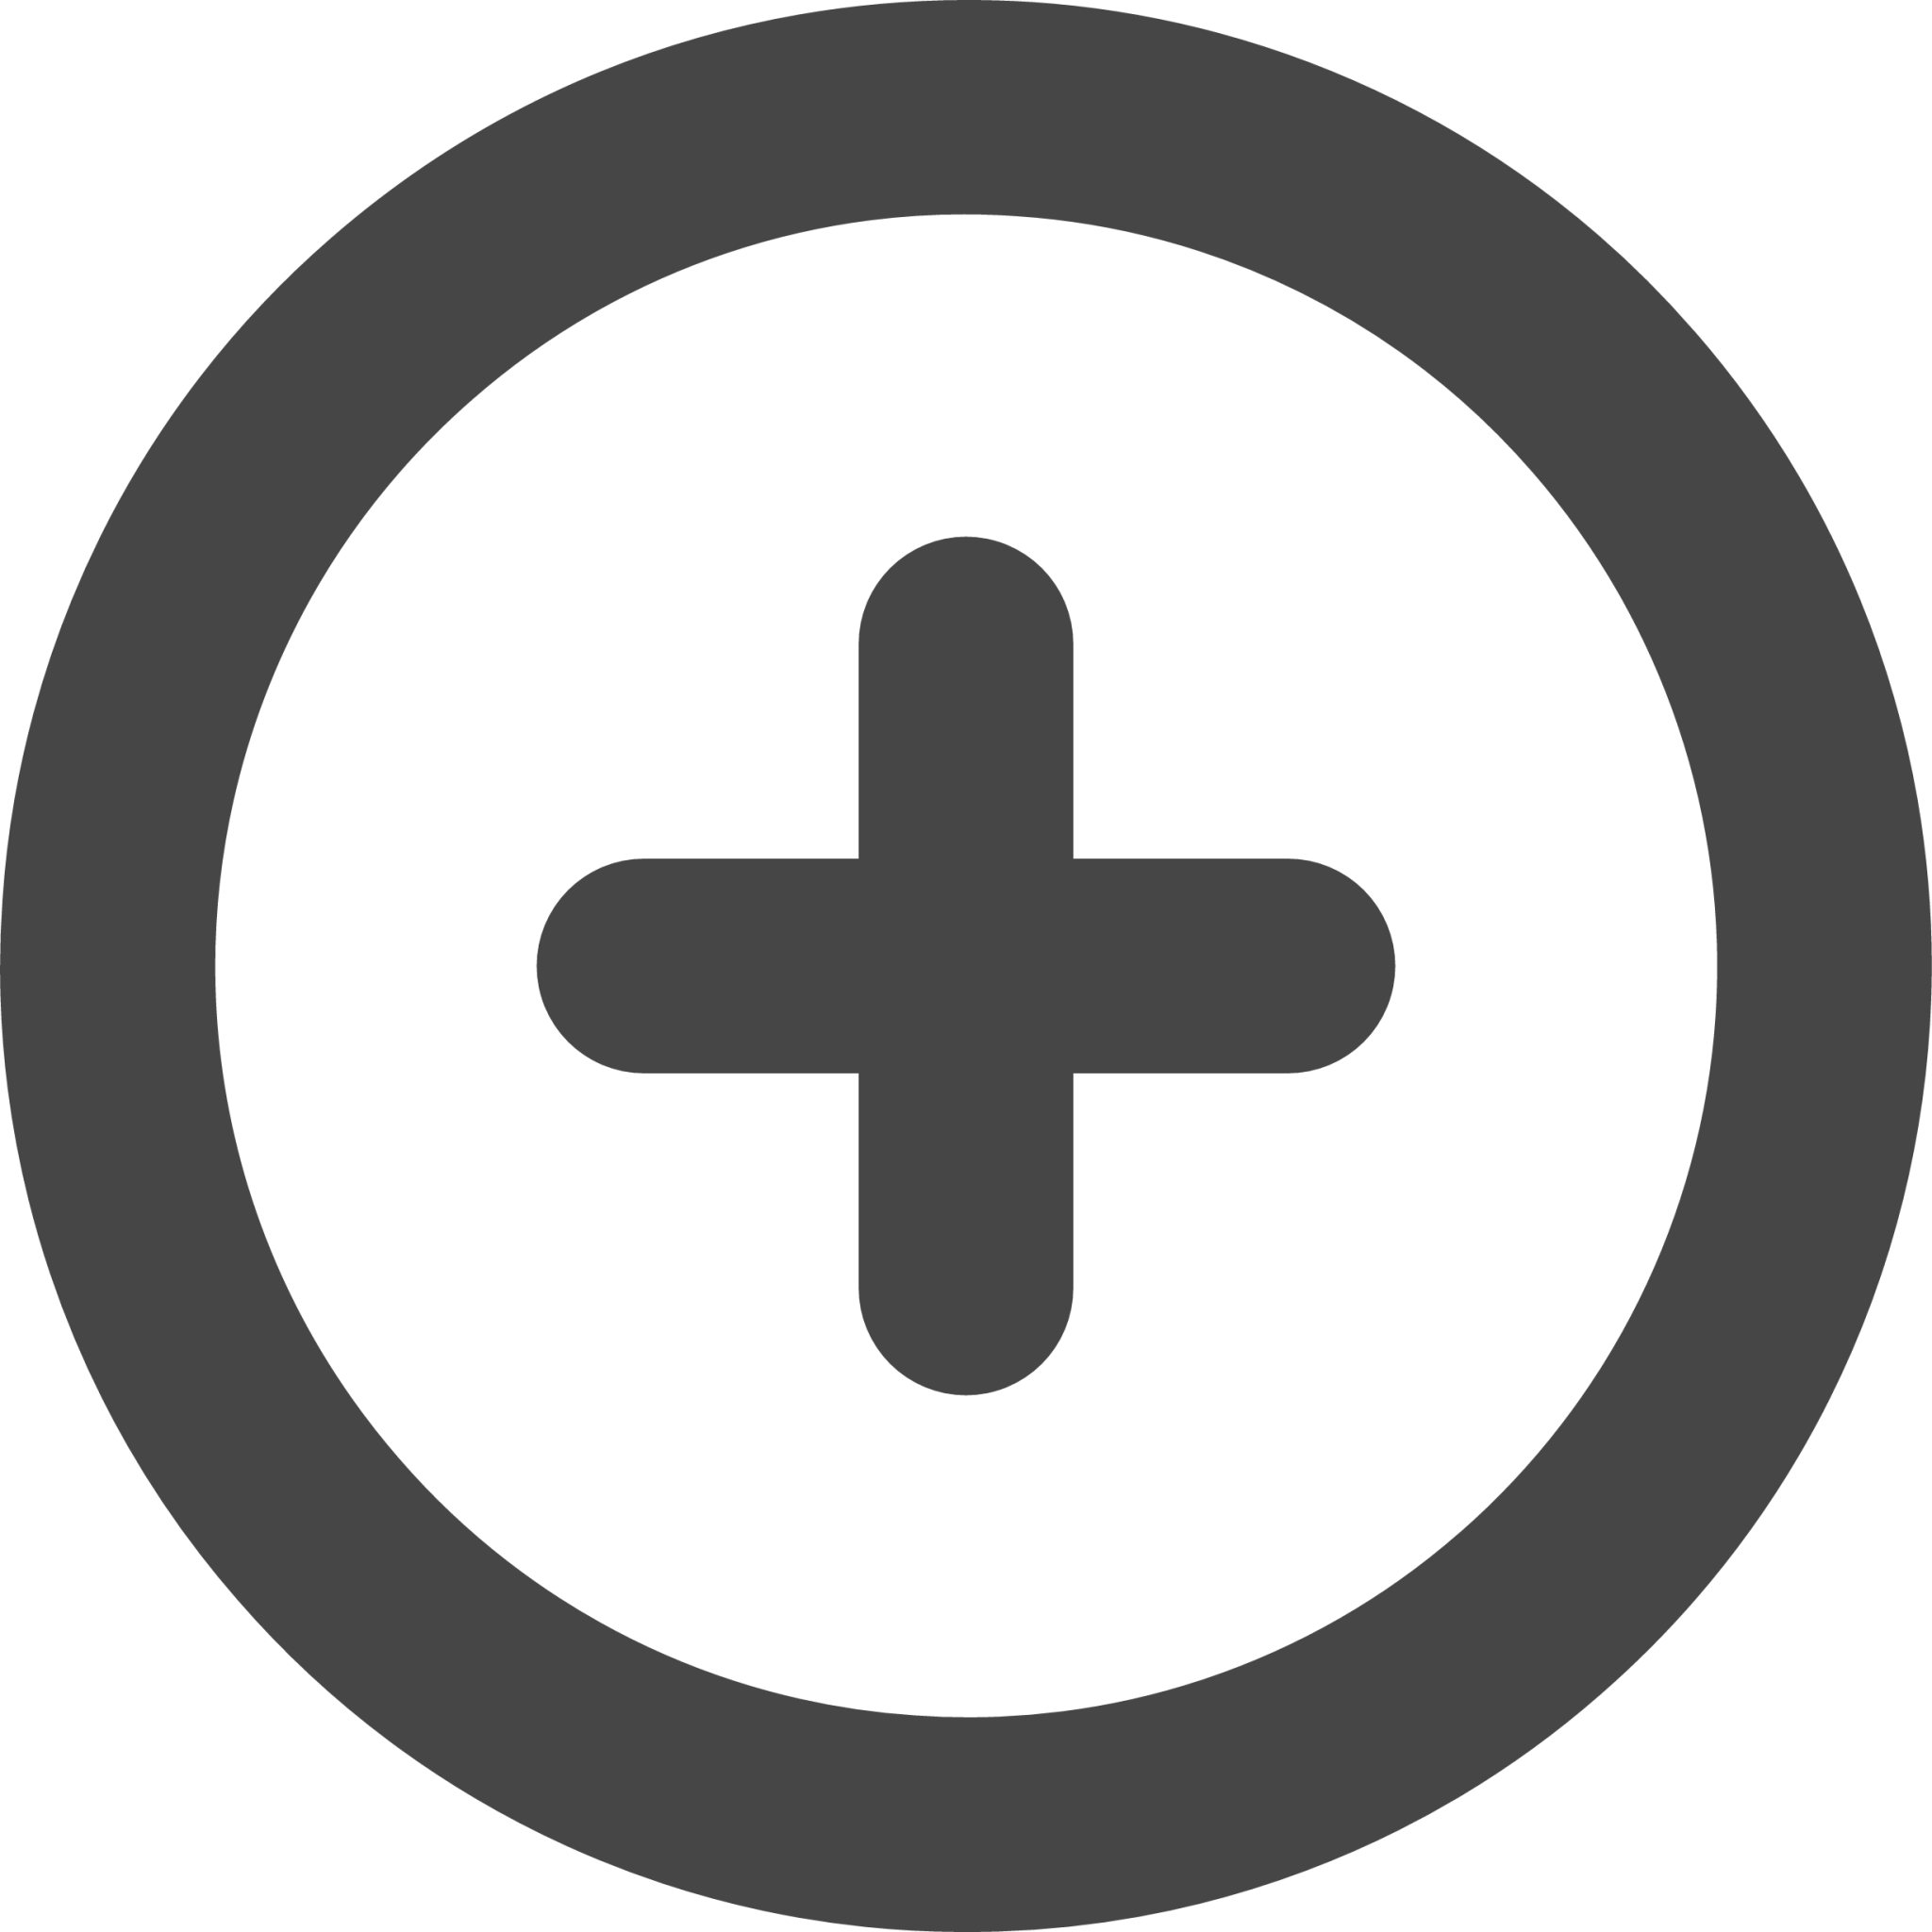 AddCircle icon